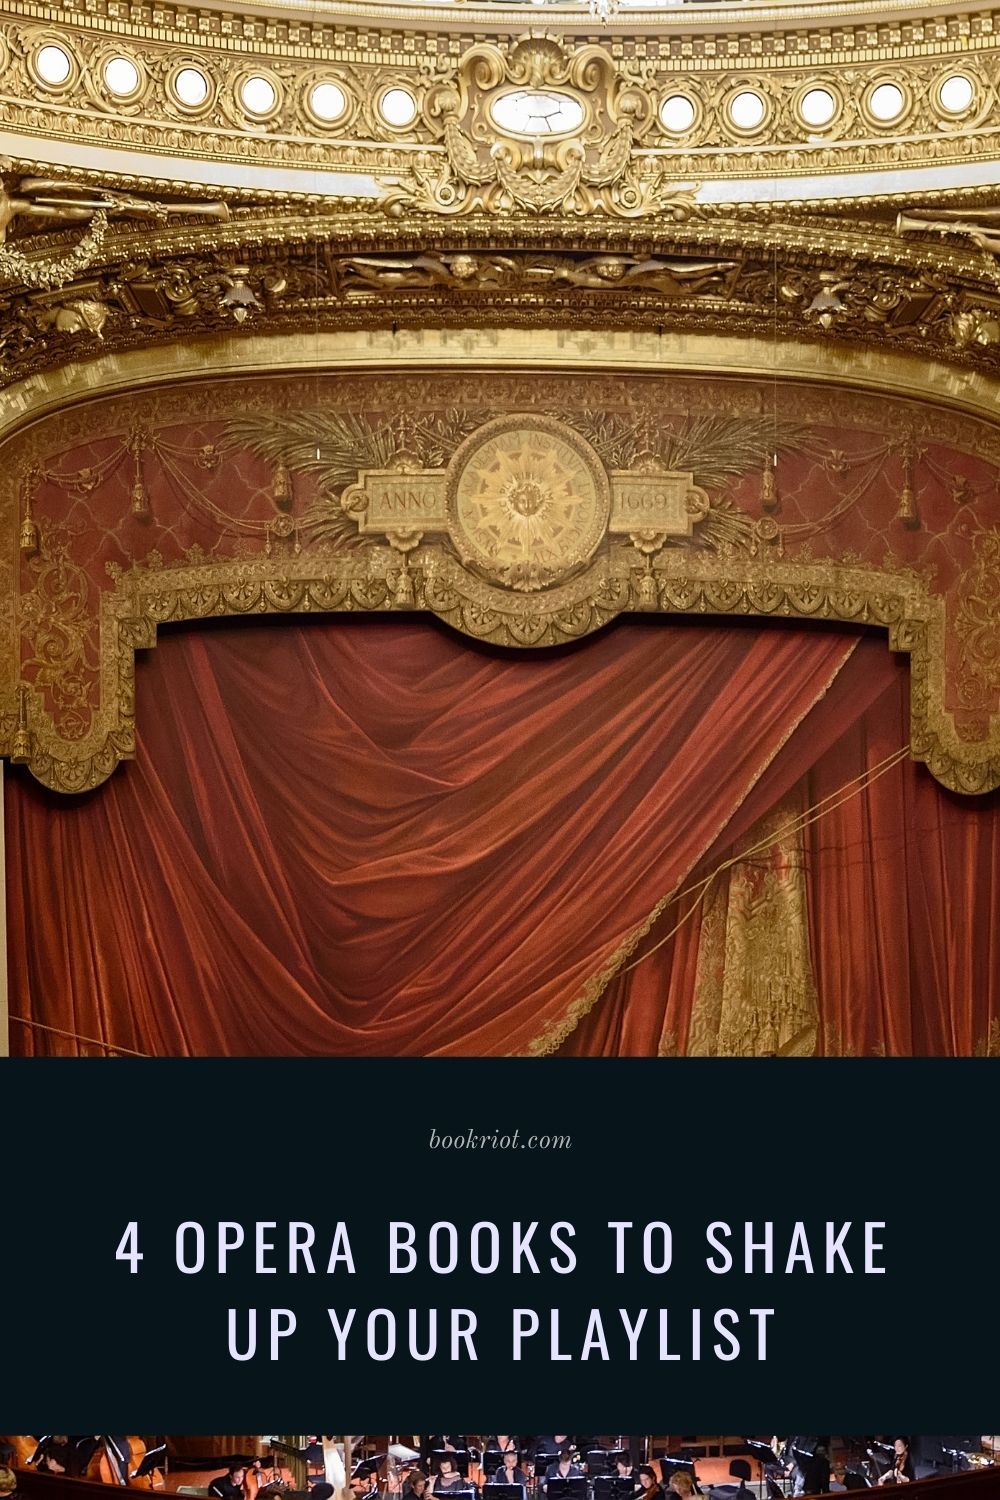 4 Opera Books To Shake Up Your Playlist